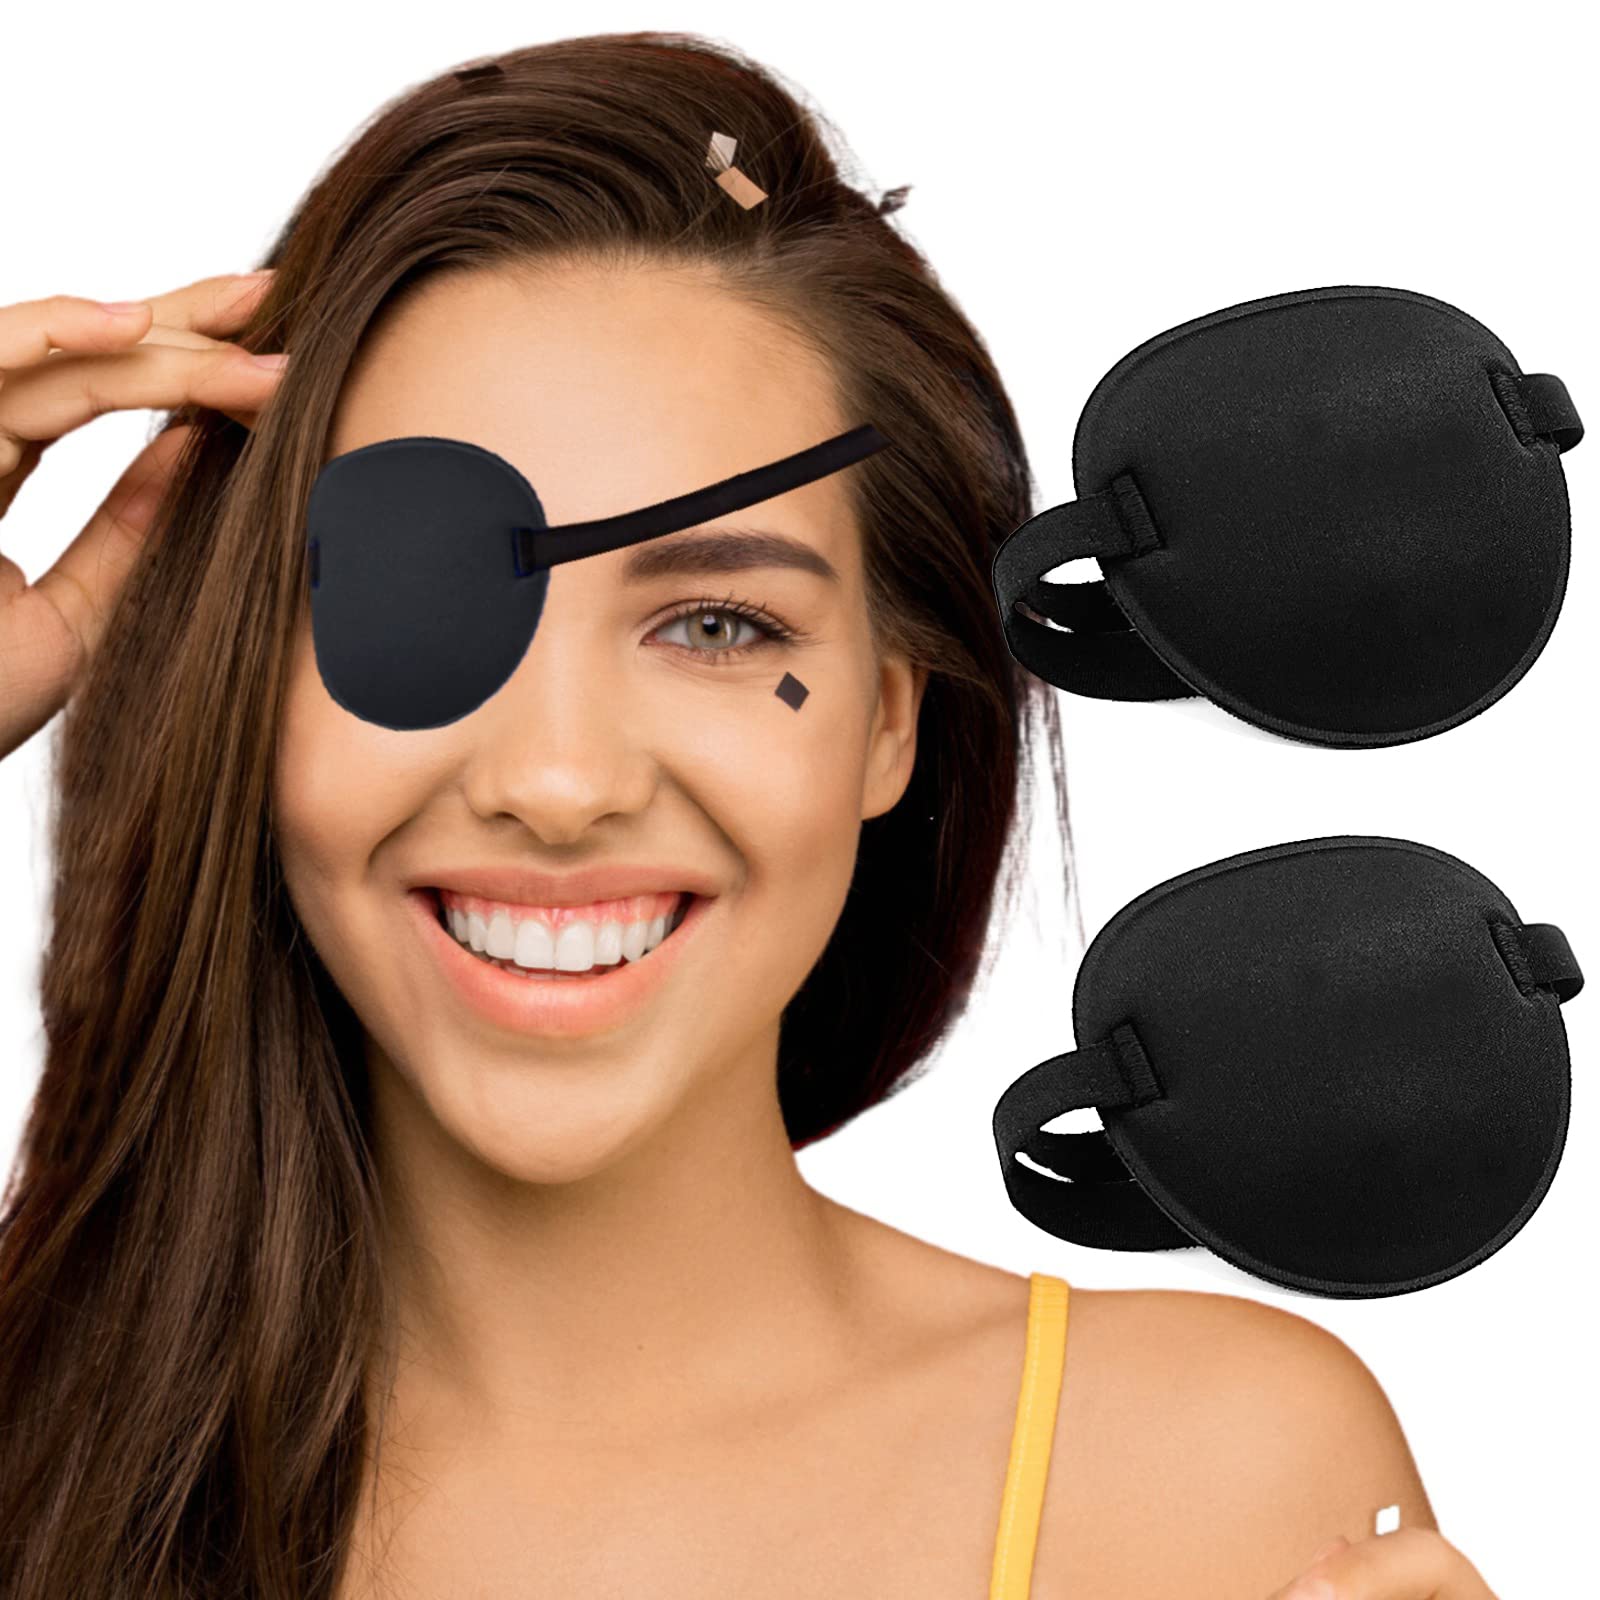 THSIREE 2PCS Eye Patch, Medical Eye Patches, Adjustable Eye Patch